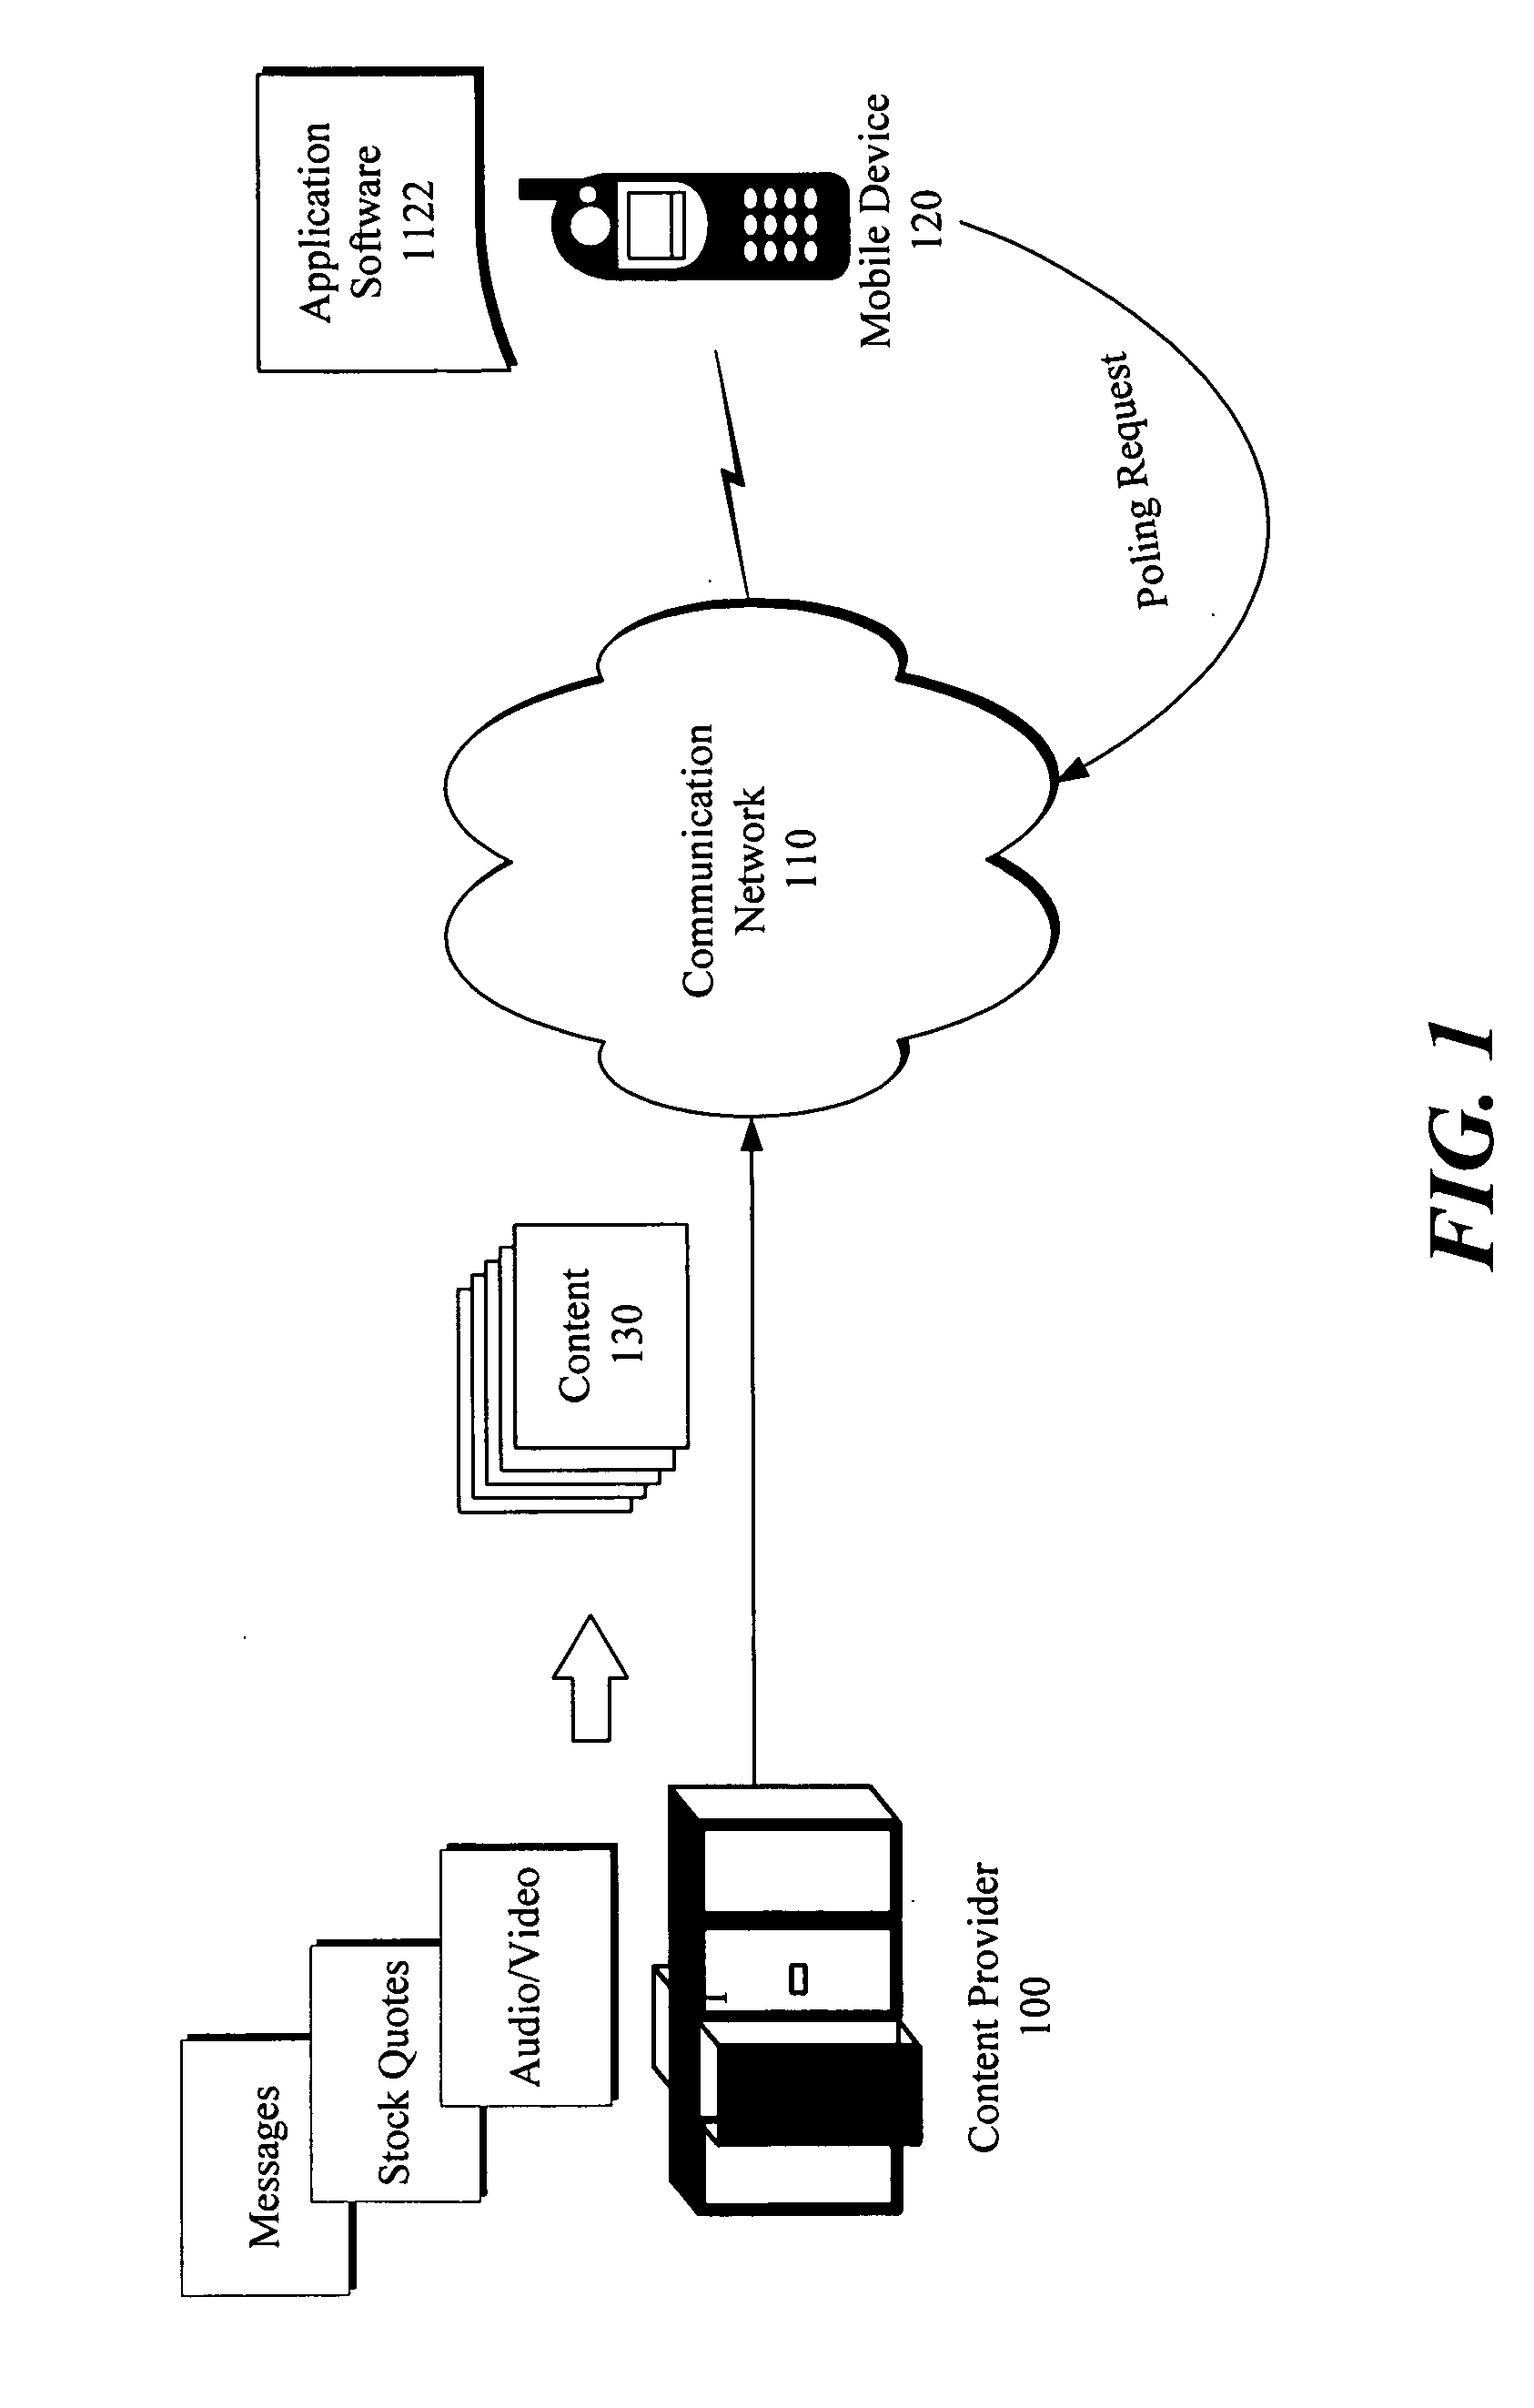 Efficient server polling system and method